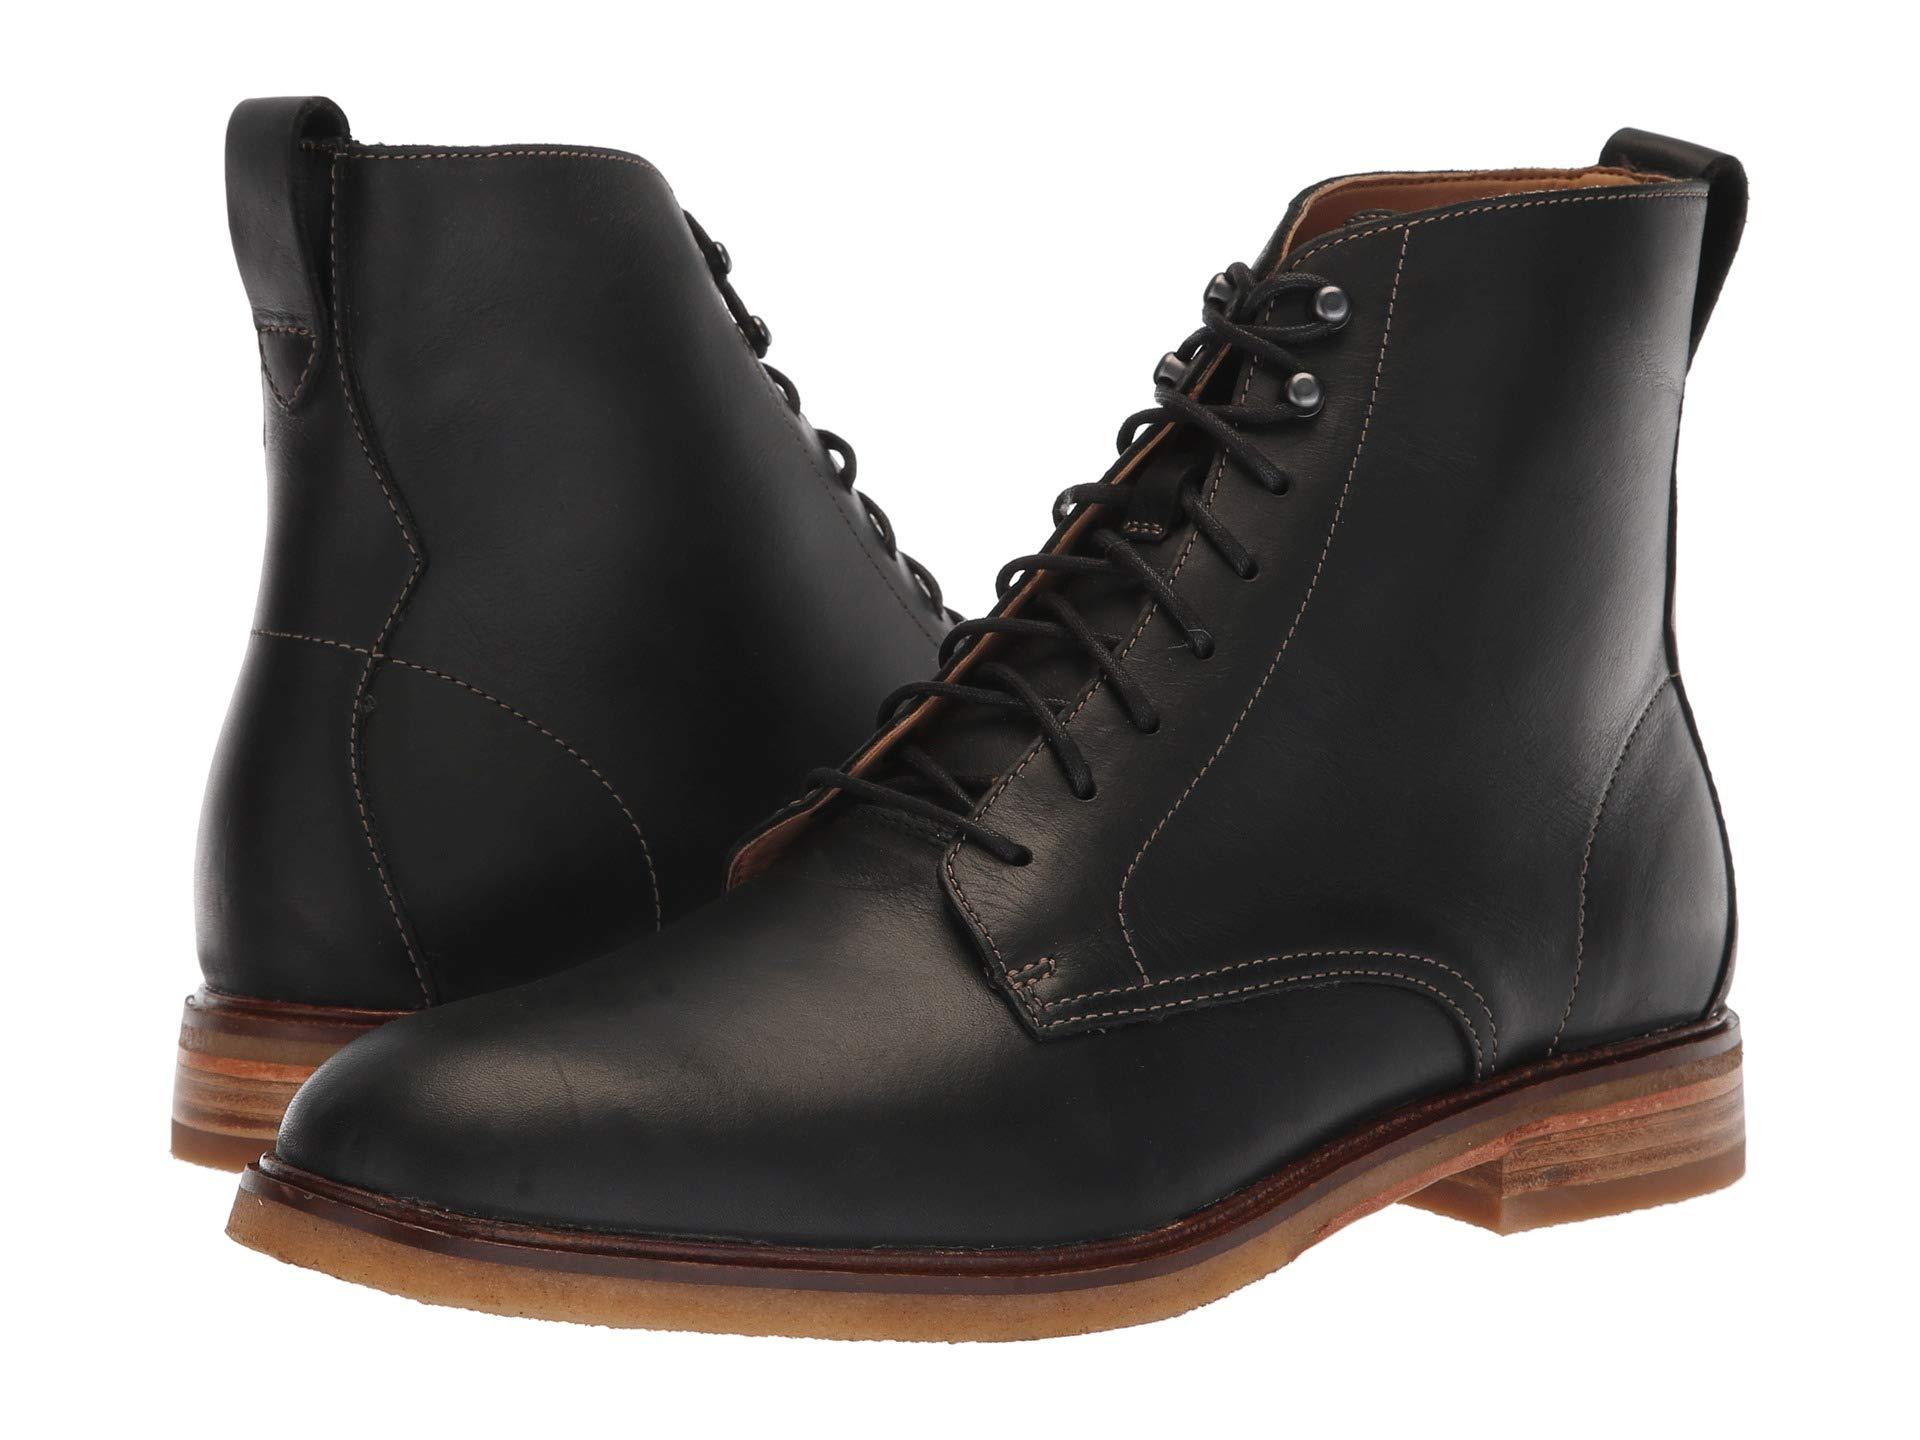 Clarkdale Rich Boots Top Sellers, SAVE 38% - www.ecomedica.med.ec